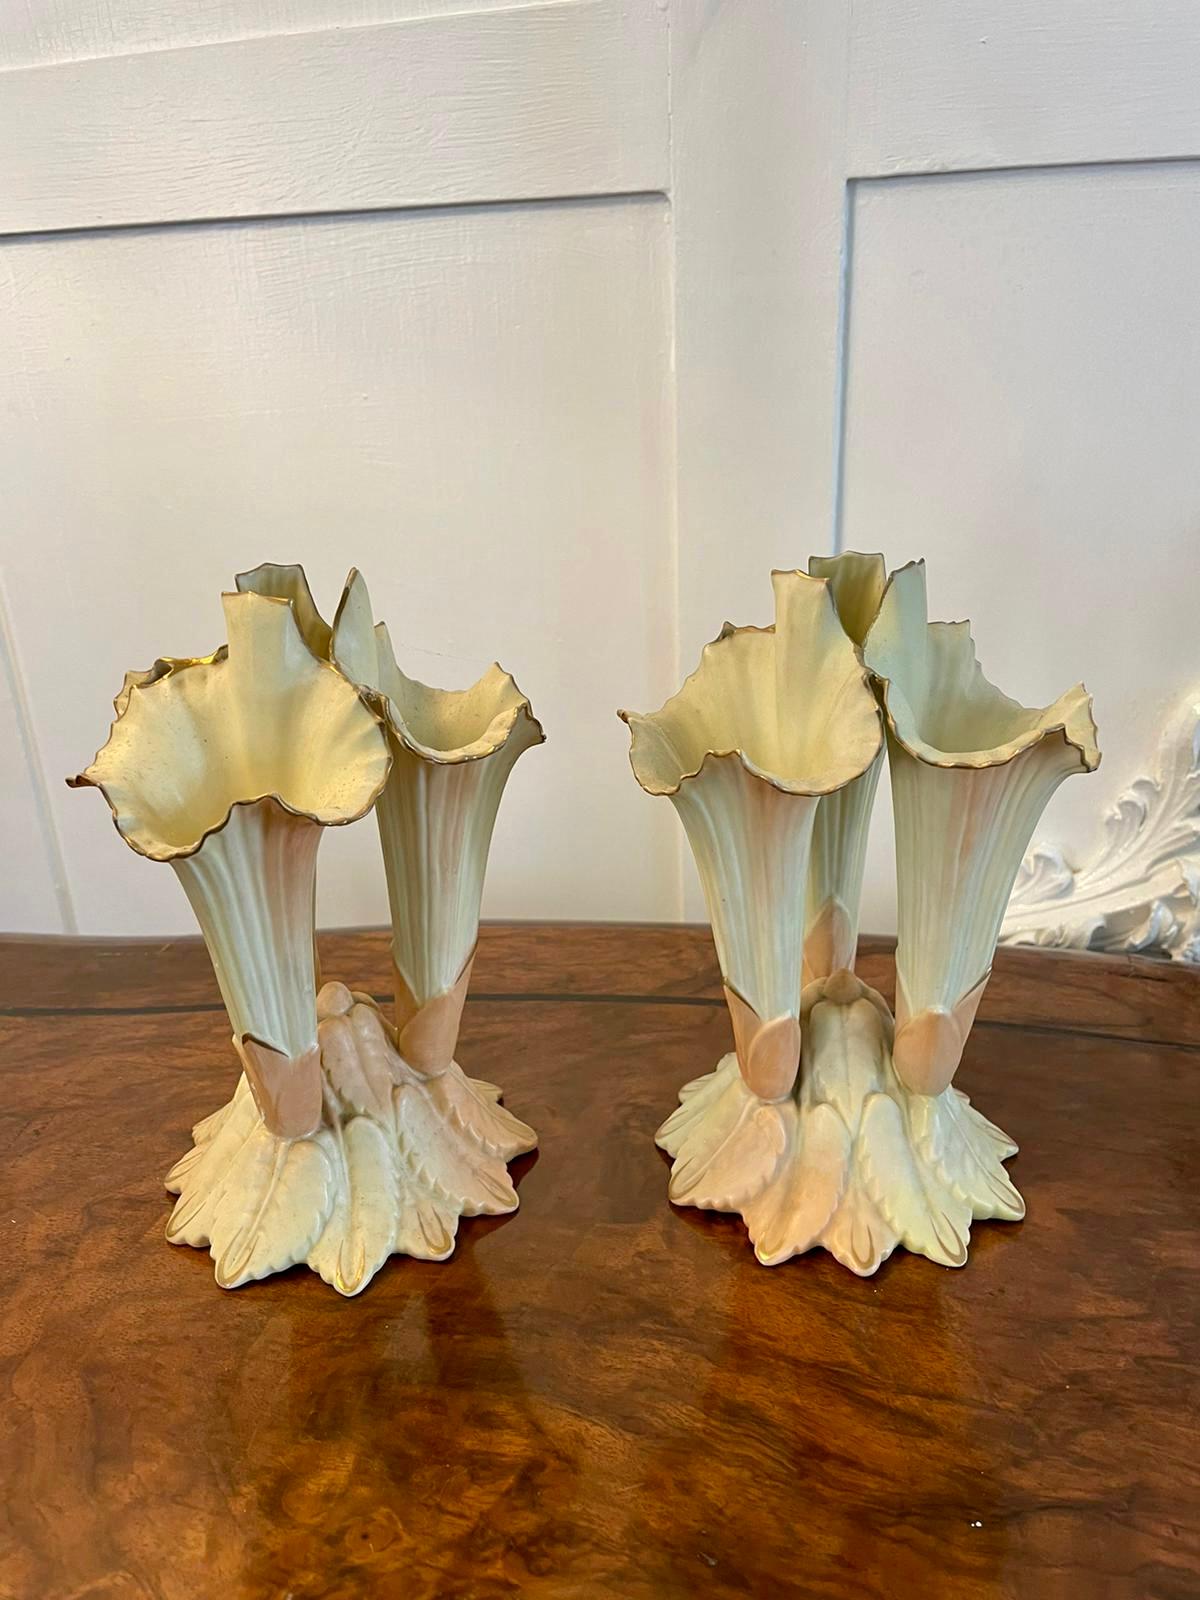 Early 20th Century Antique Locke & Co. Porcelain Blush Ivory Spill Vases For Sale